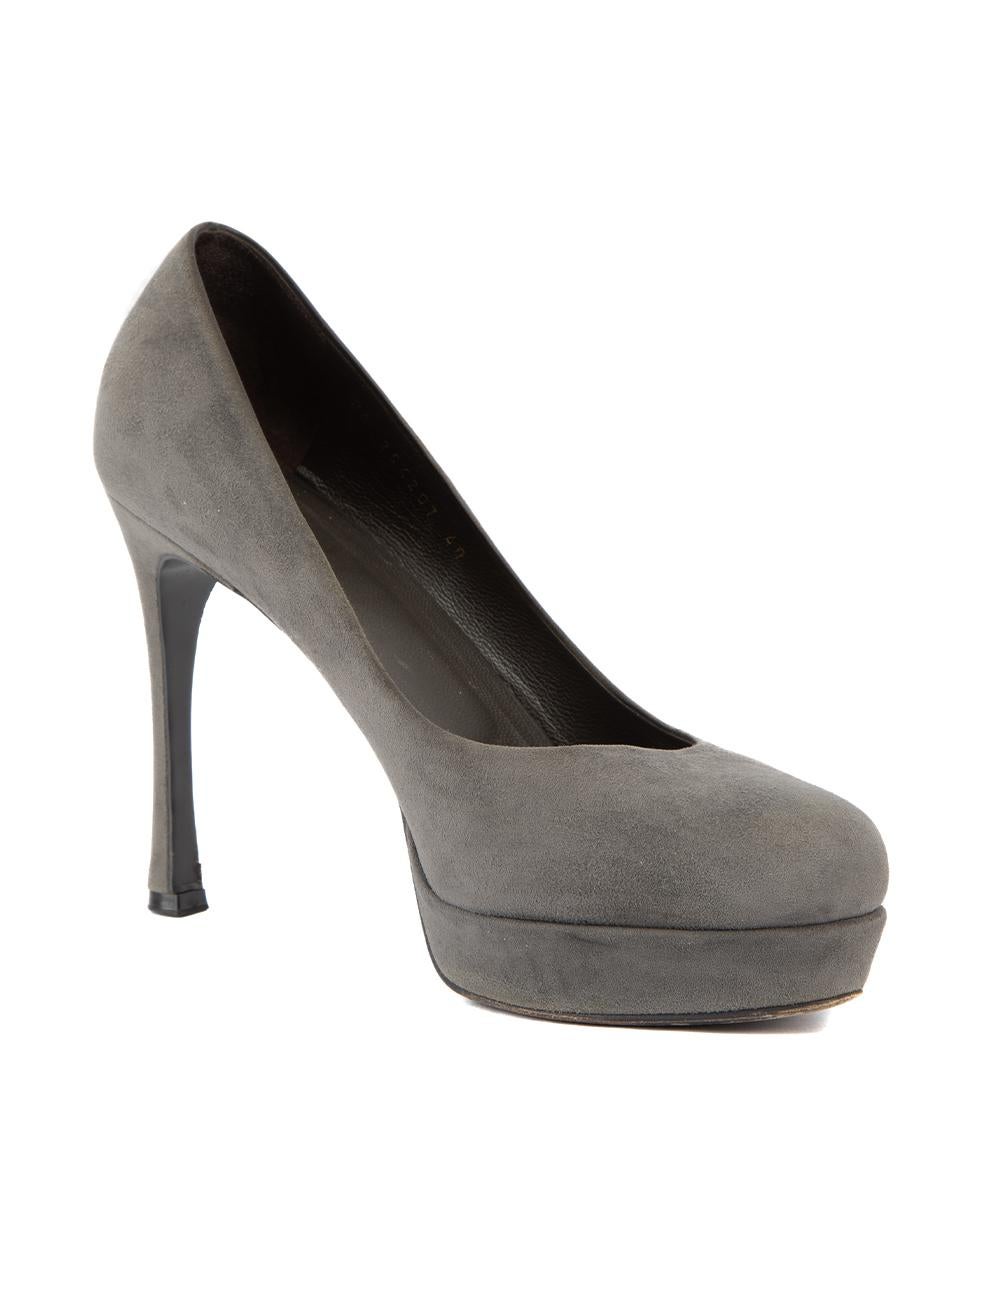 CONDITION is Very good. Minimal wear to heels is evident. Minimal wear to the suede exterior and both heel tips are a little loose There is also visible wear to the outsole on this used Yves Saint Laurent designer resale item. This item comes with